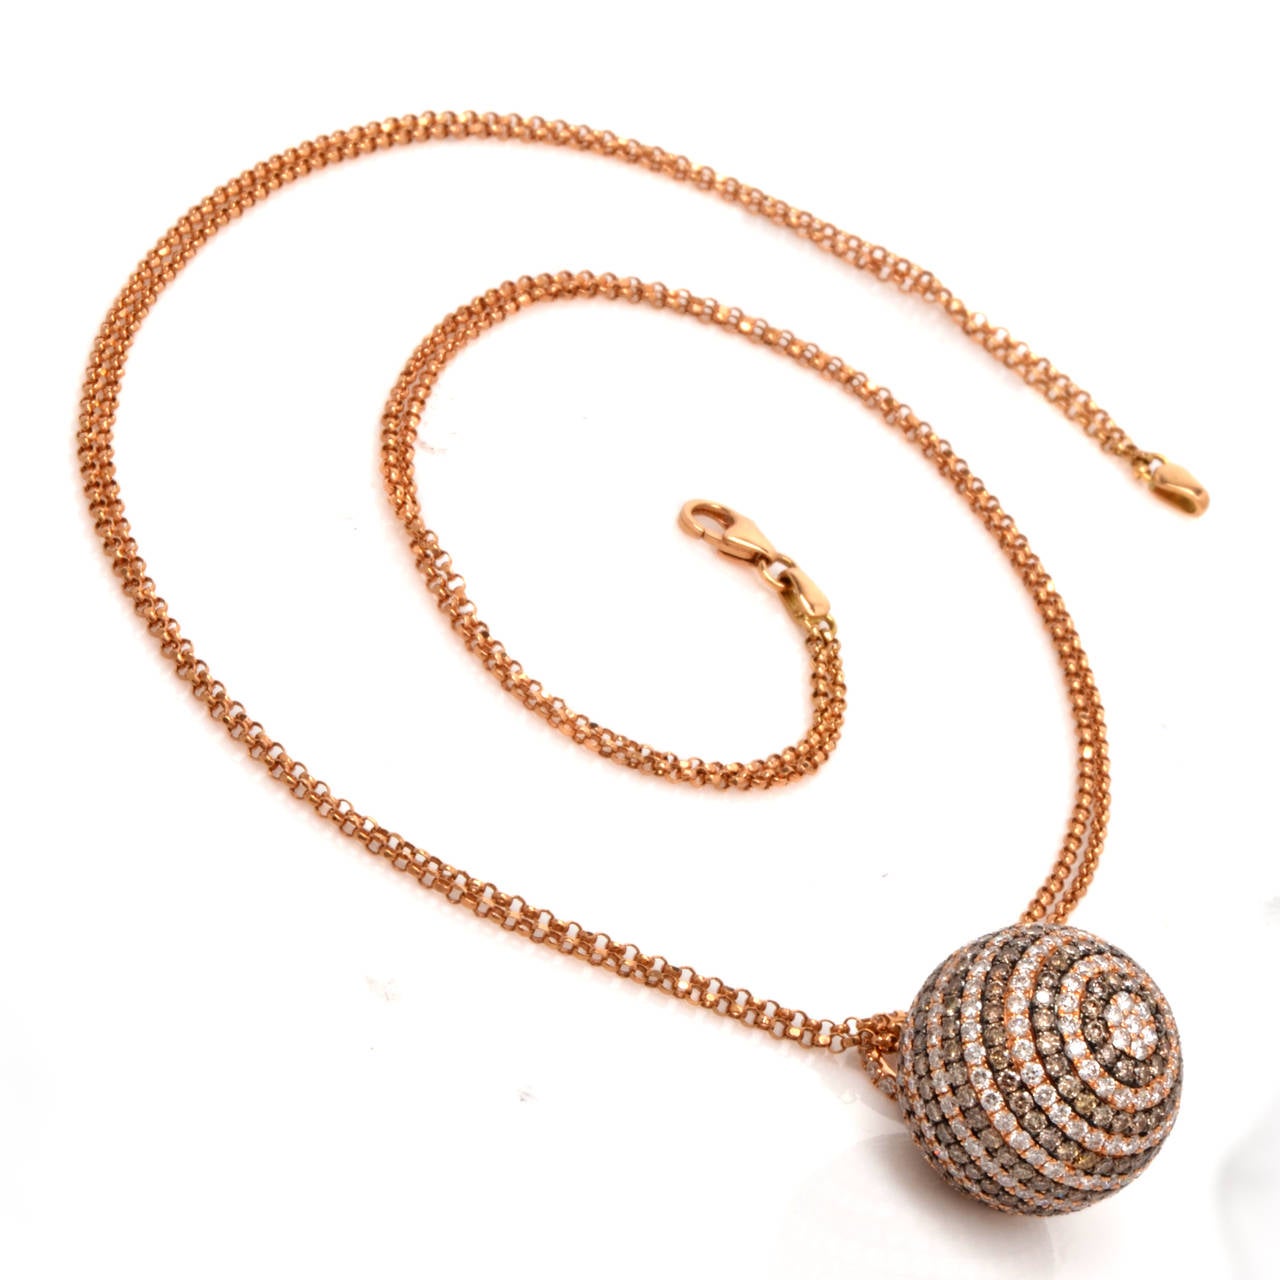 This pendant necklace with genuine pave-set fancy natural color and white diamonds is crafted in solid 18K rose gold.  This alluring necklace of notable refinement incorporates a ball-shaped pendant,  resplendent in 15 horizontal rows of alternately